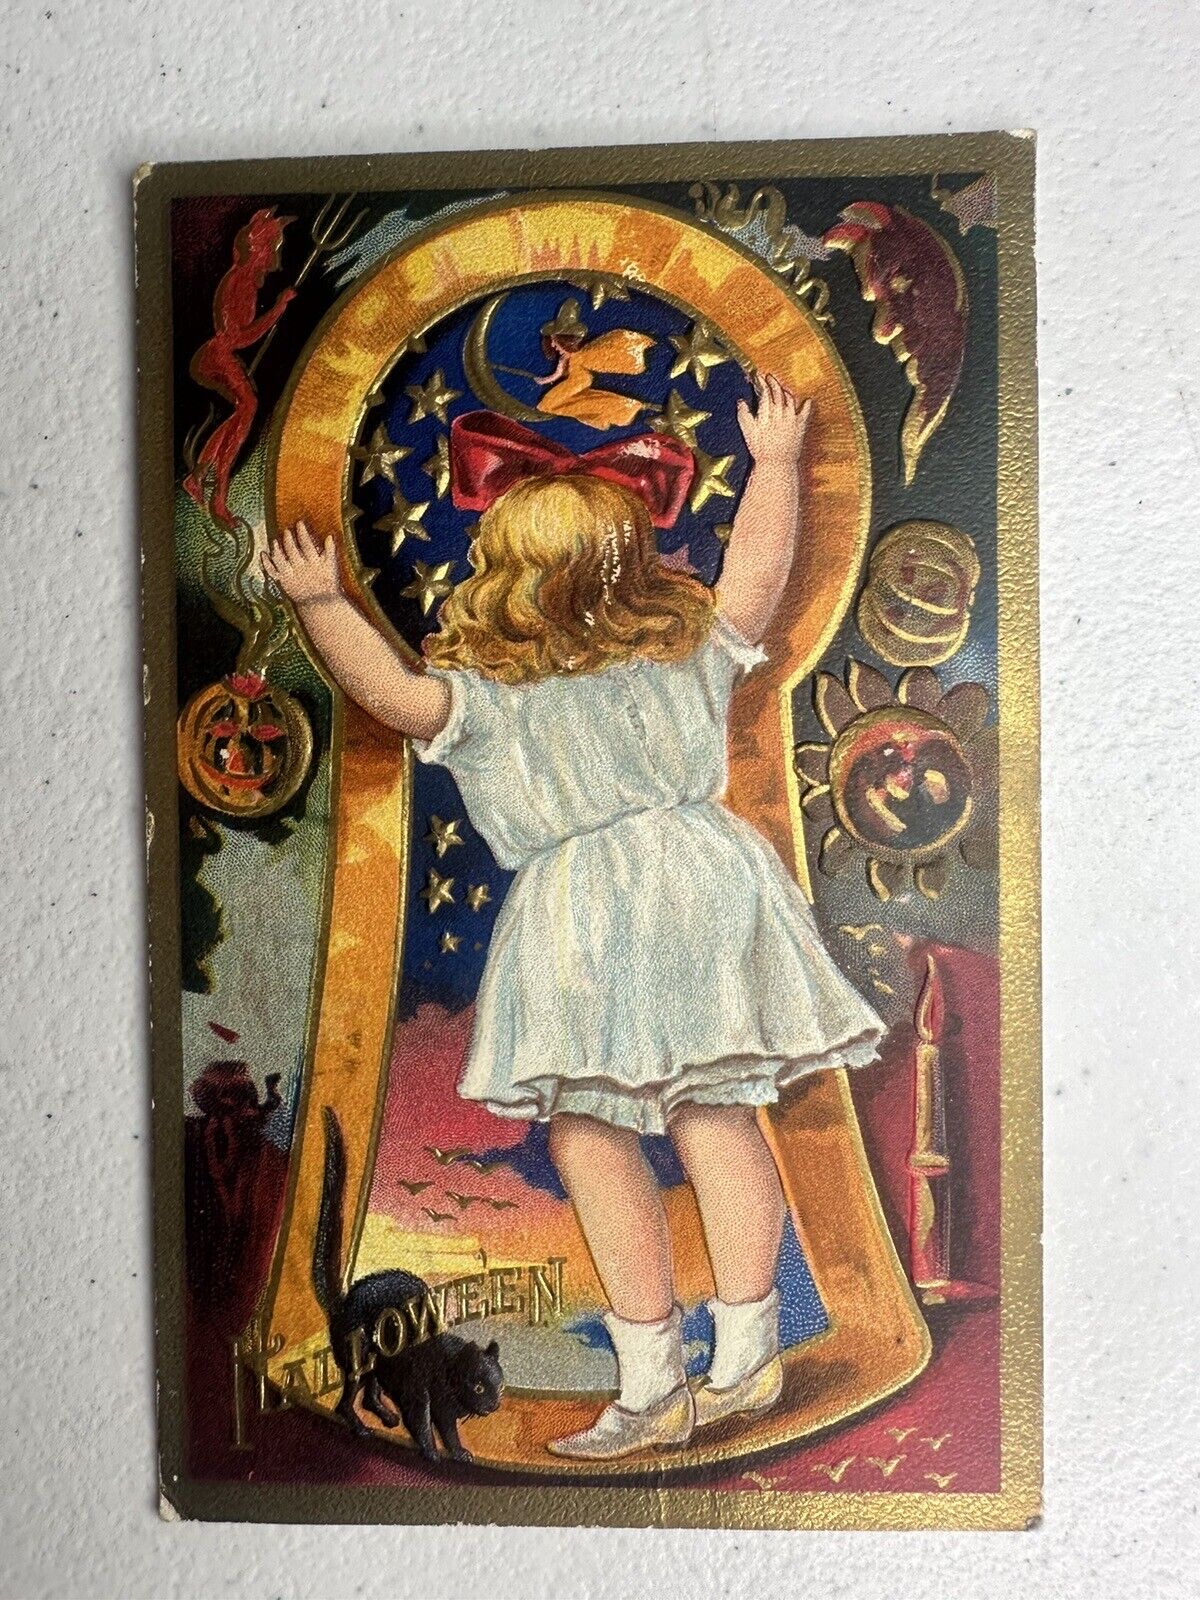 Antique Halloween 1910 Collectible Card, Midnight Imagery, Early Americana Key